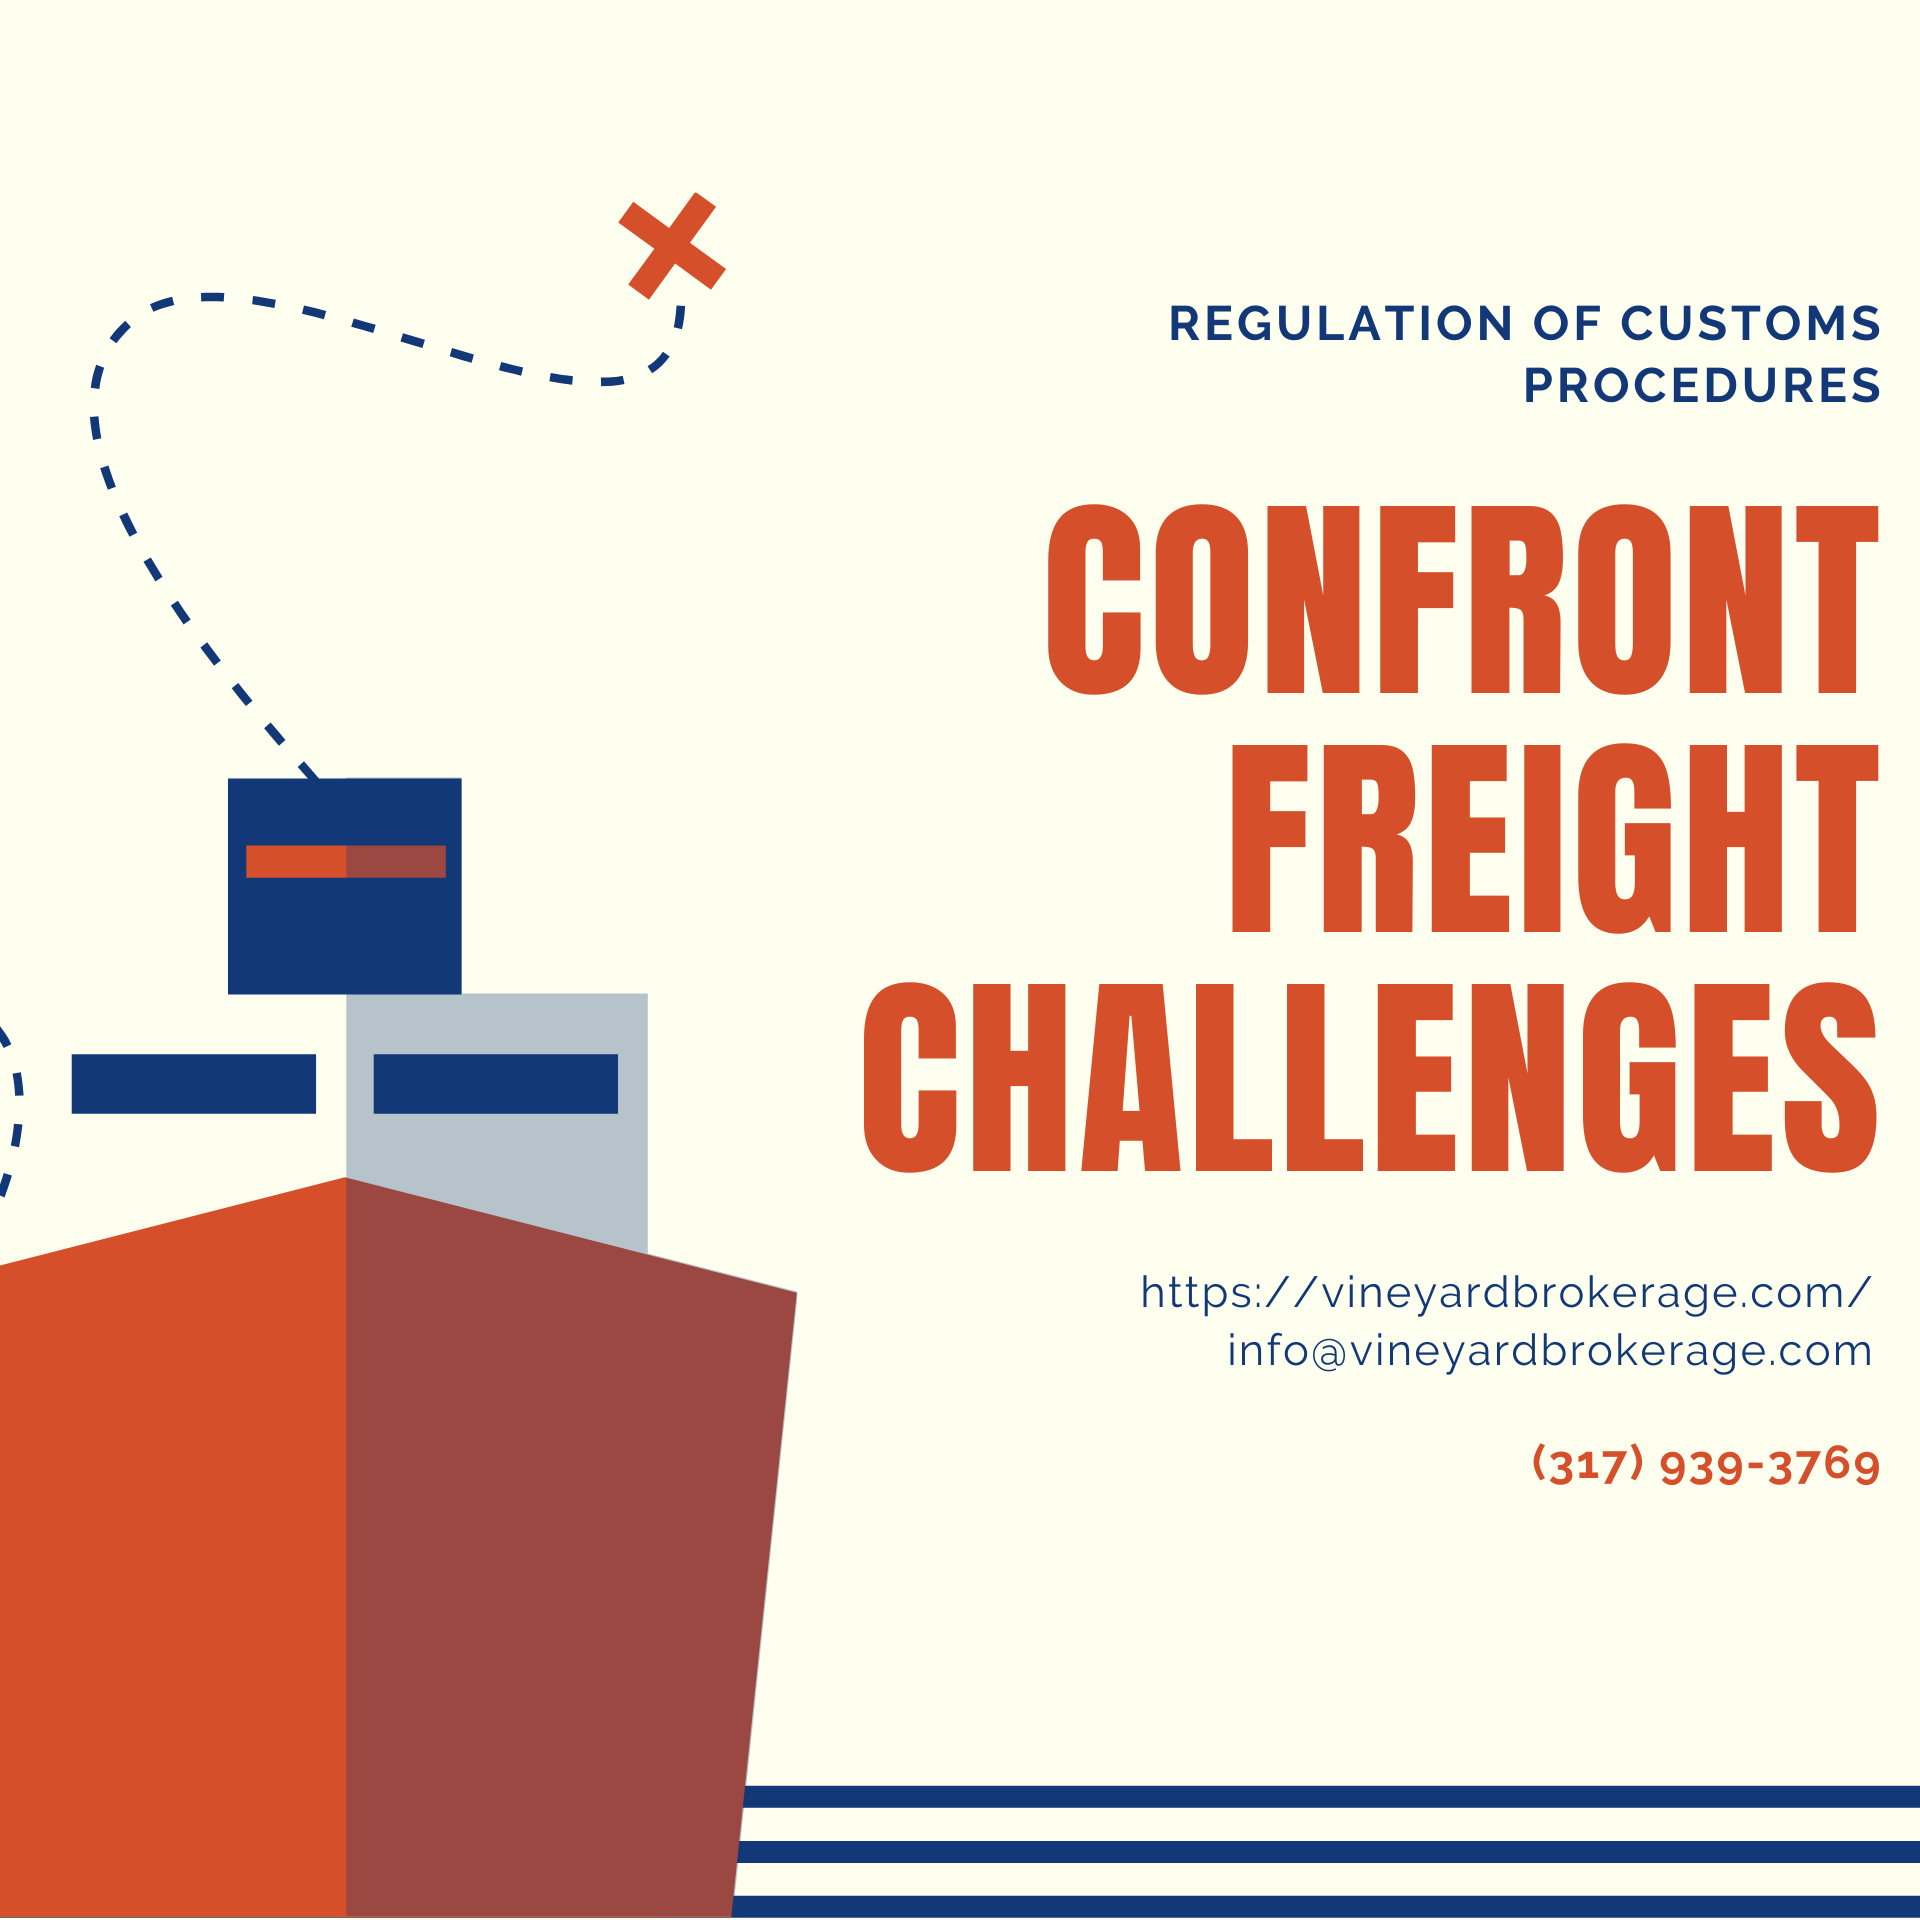 How to Confront Freight Challenges on the Border